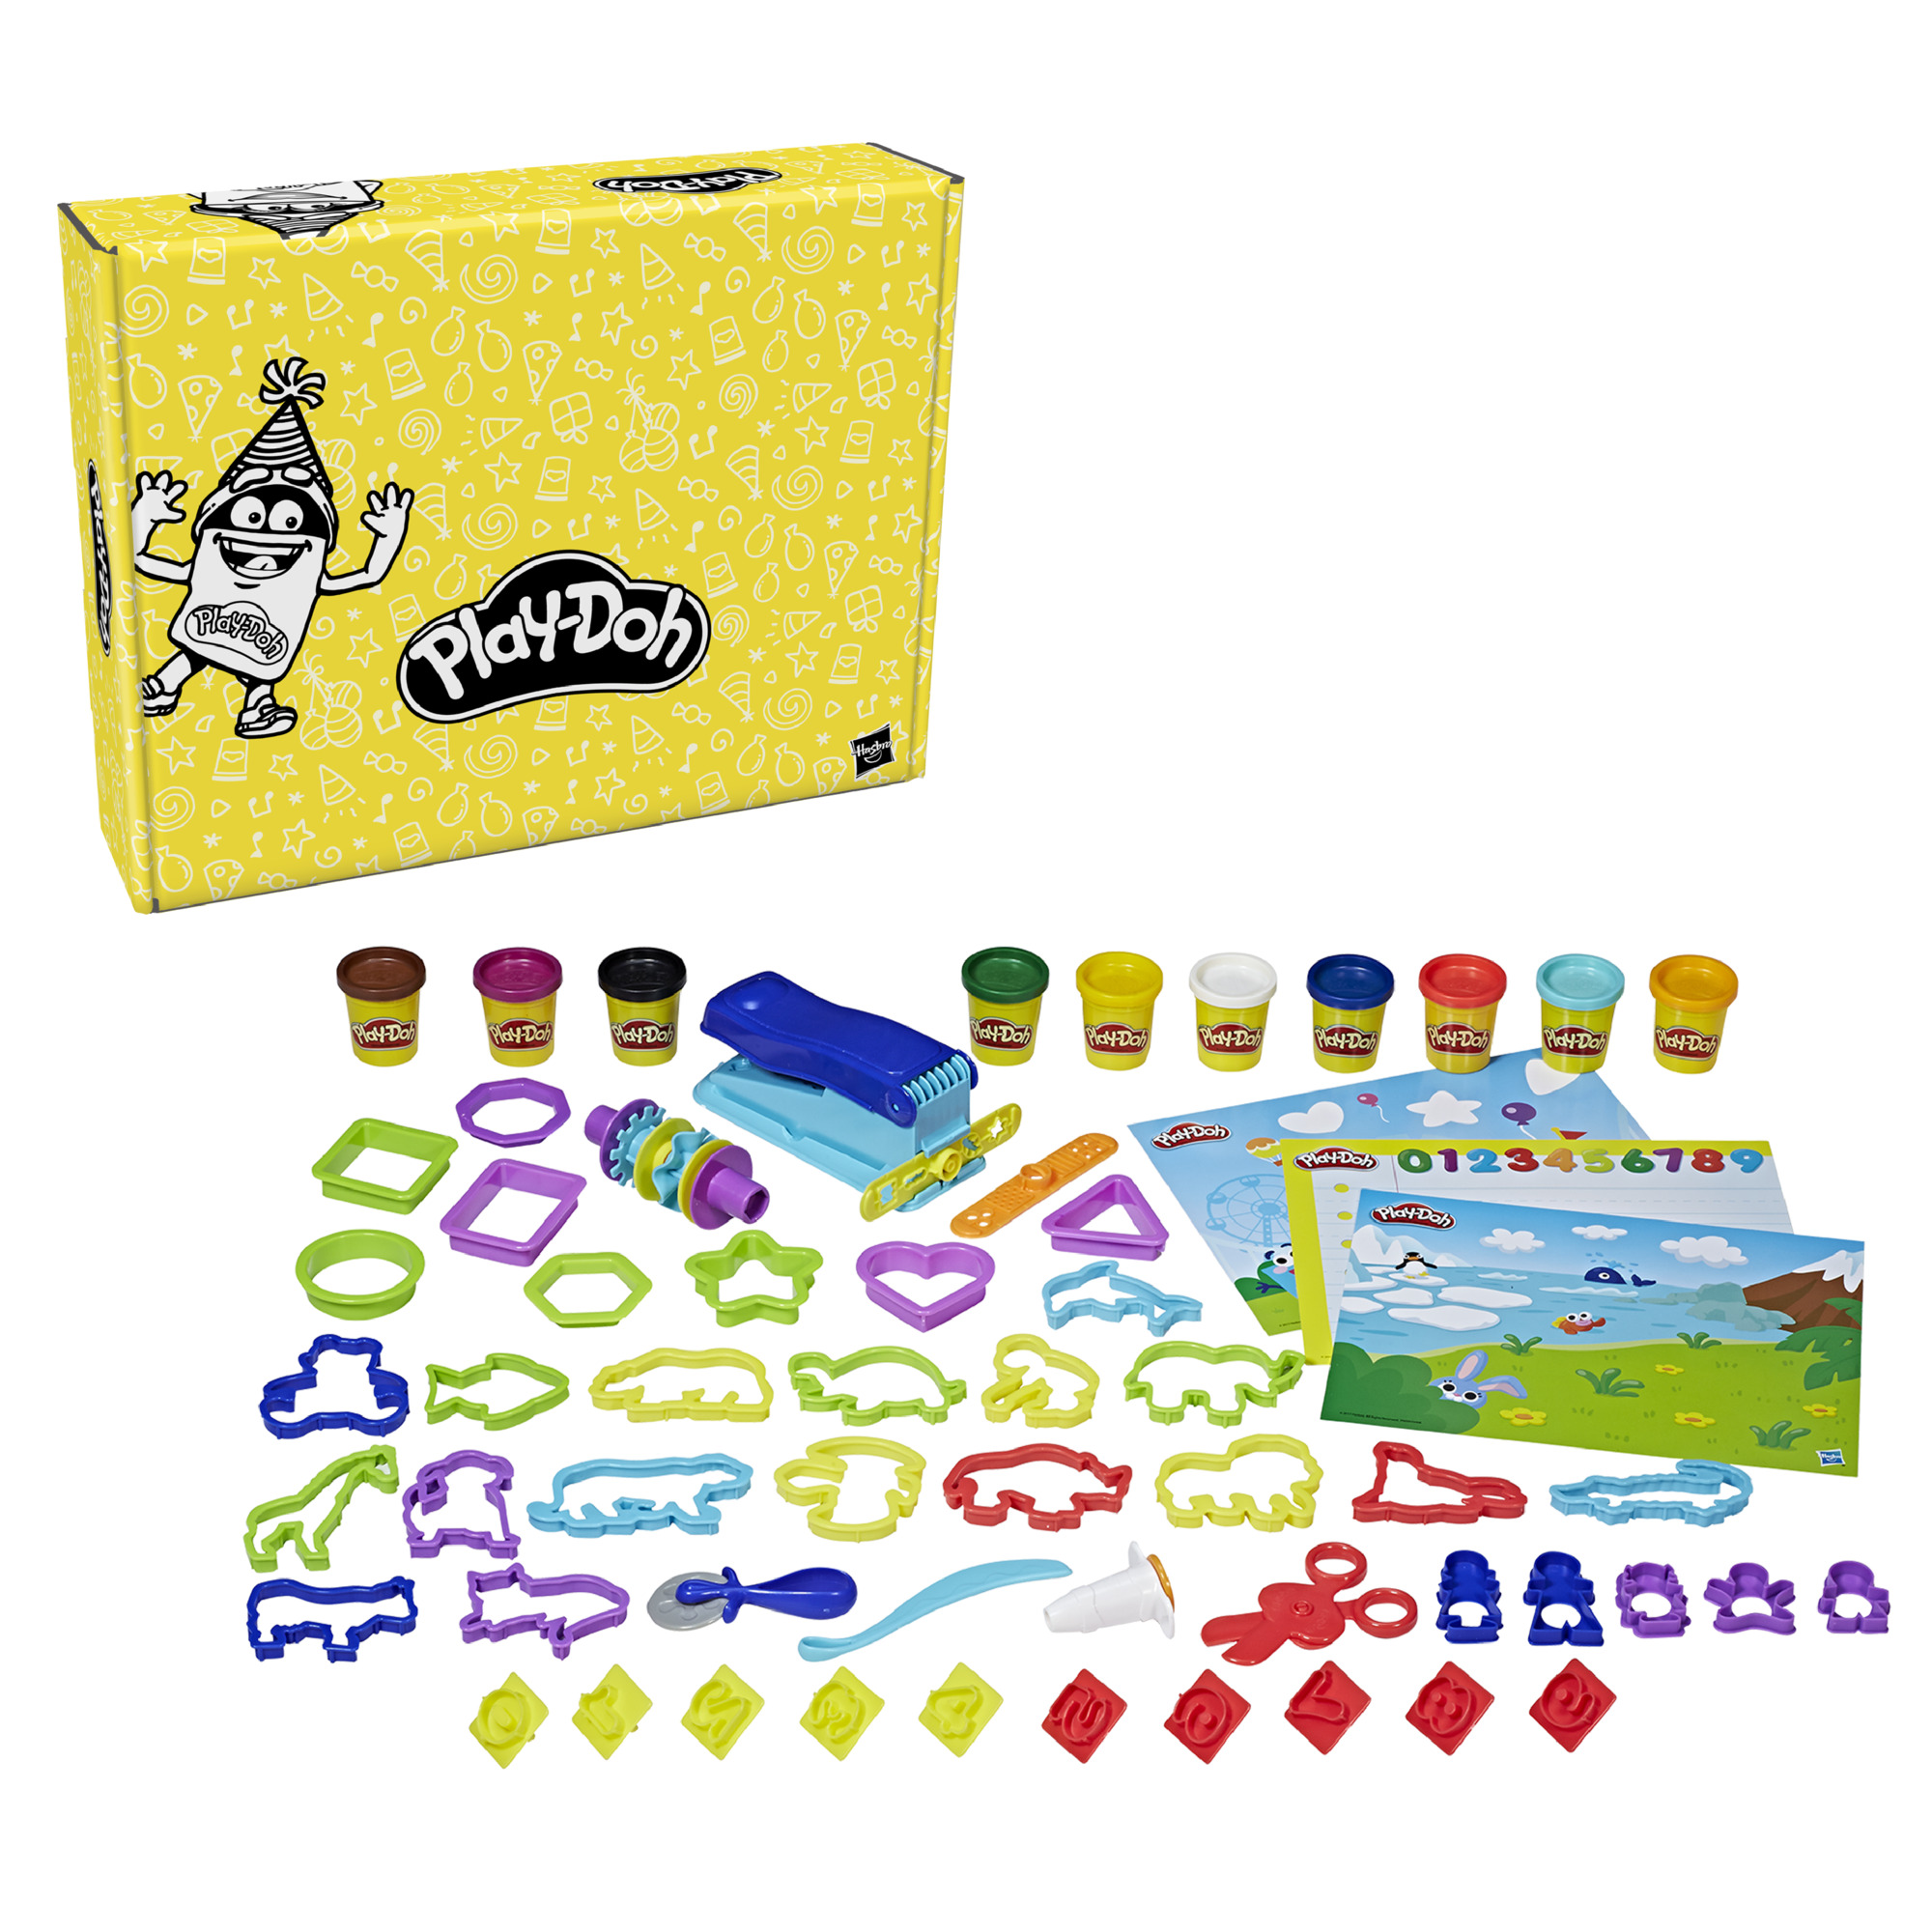 Play-Doh Kid's Play-Date Party Crate Playset - image 1 of 9